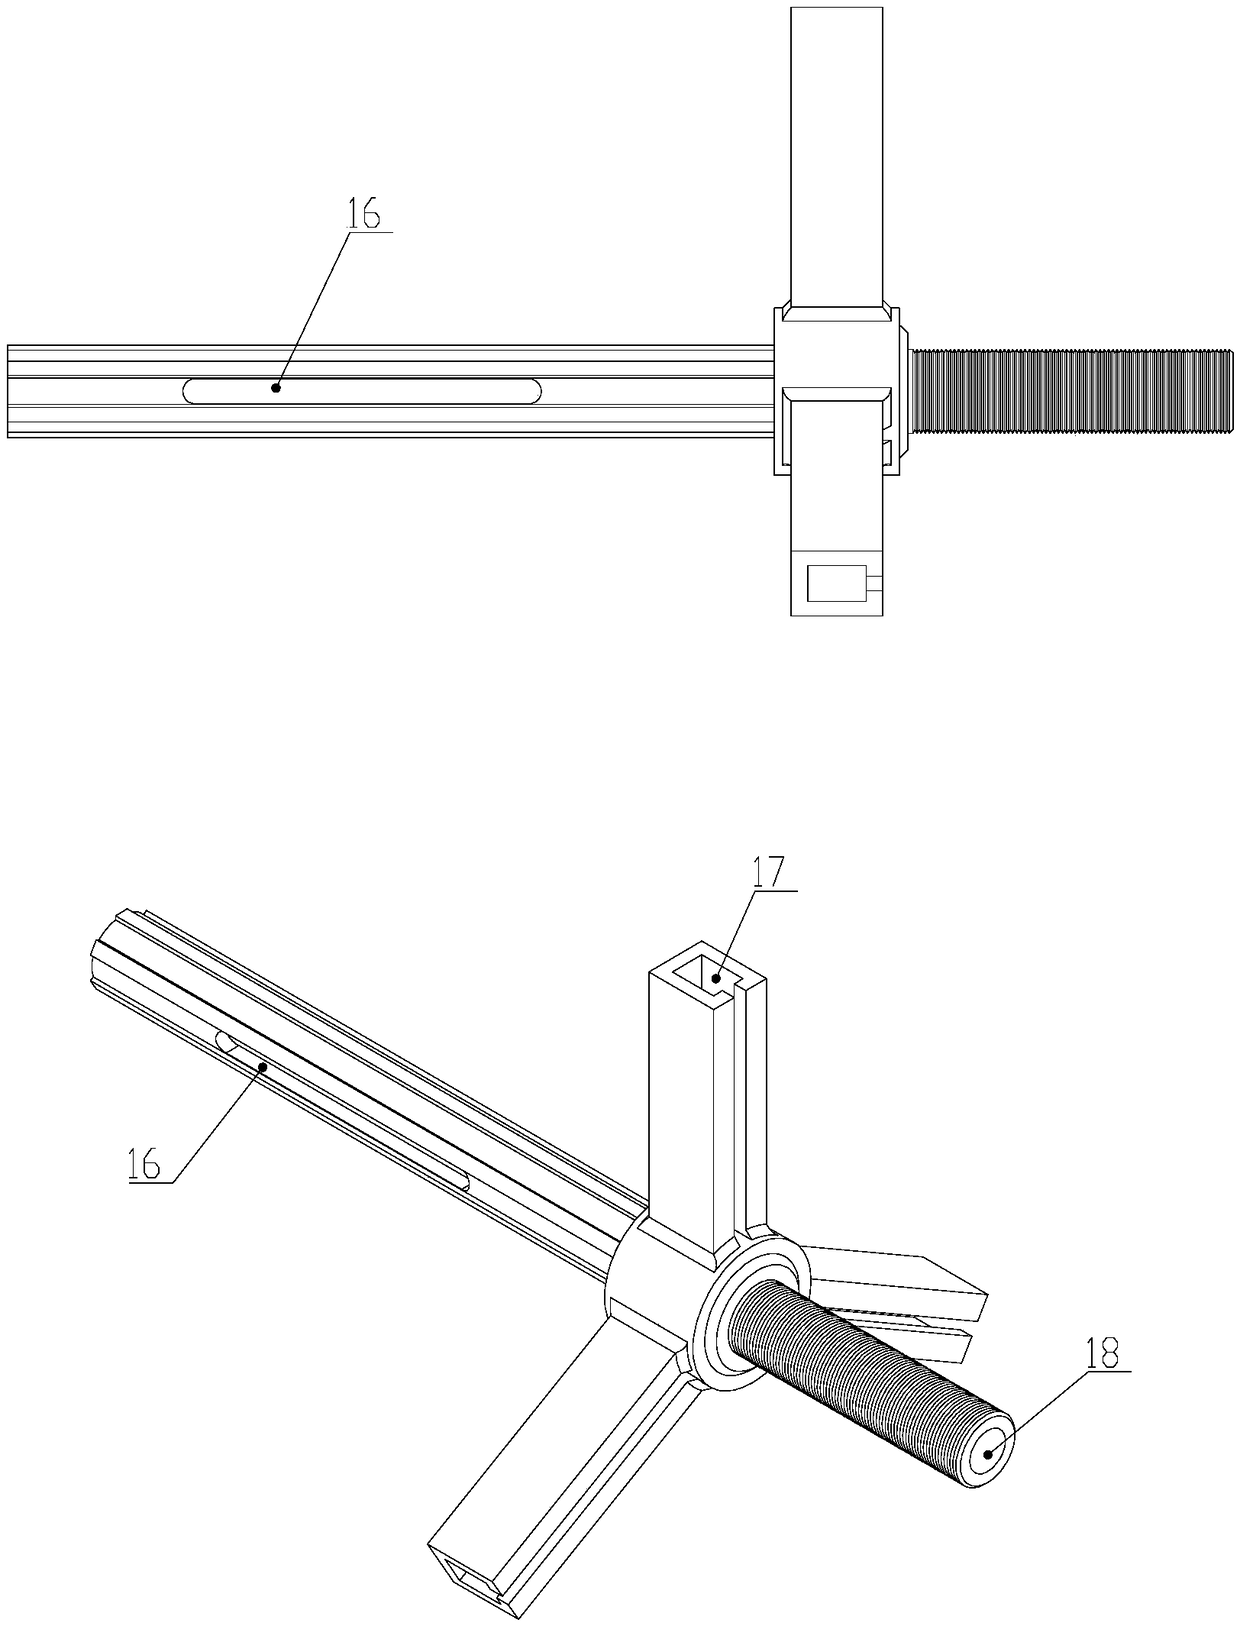 Automatic centering fixture for flange welding